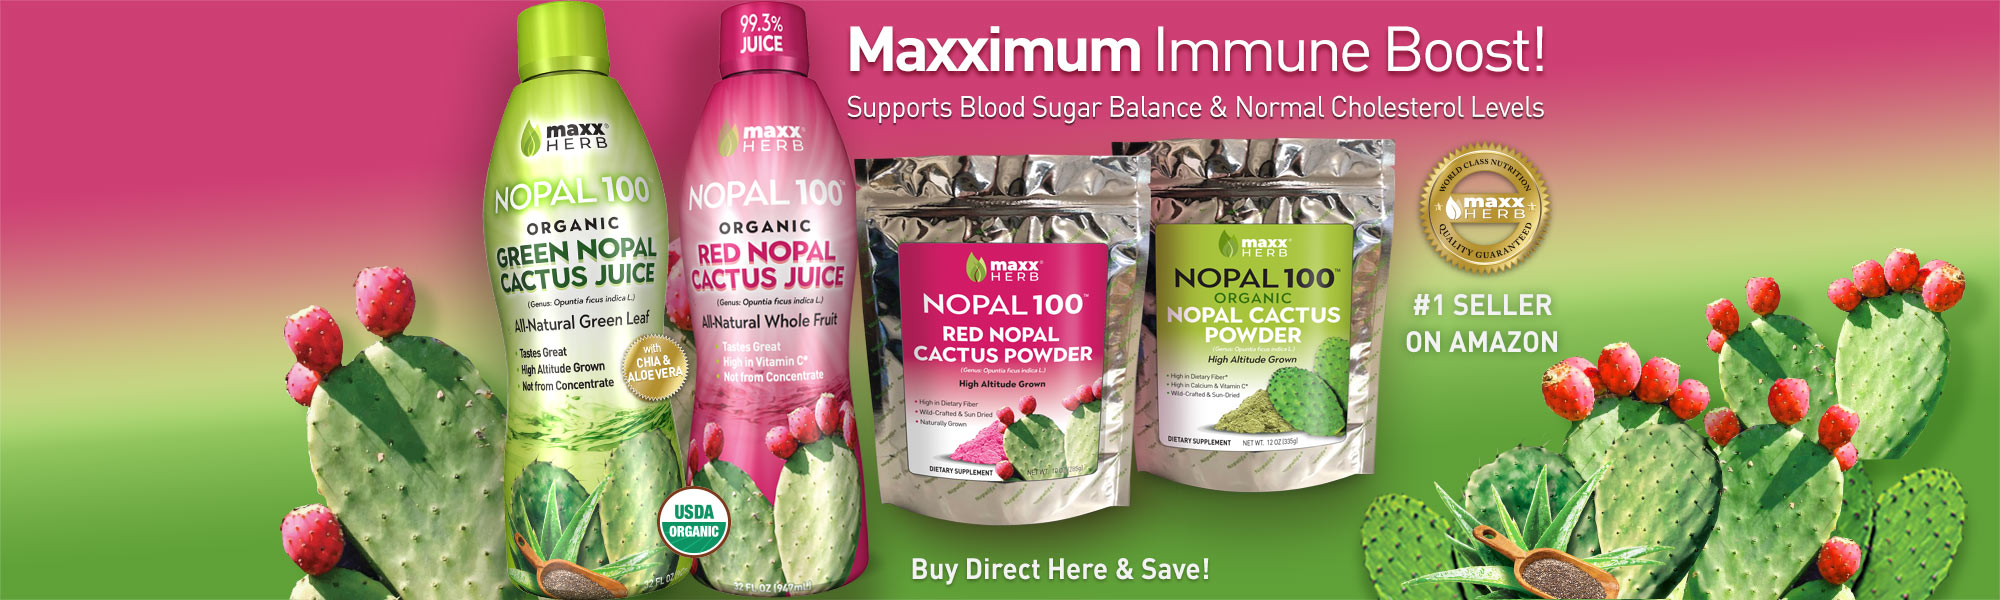 Nopal Cactus Juice & Powder! Nopal 100 Cactus Juice &Cactus Powder! Maxx Herb organic Nopal cactus juice and powder supplements. Maxximum Immune Boost! Supports blood sugar balance, digestion, and more! 